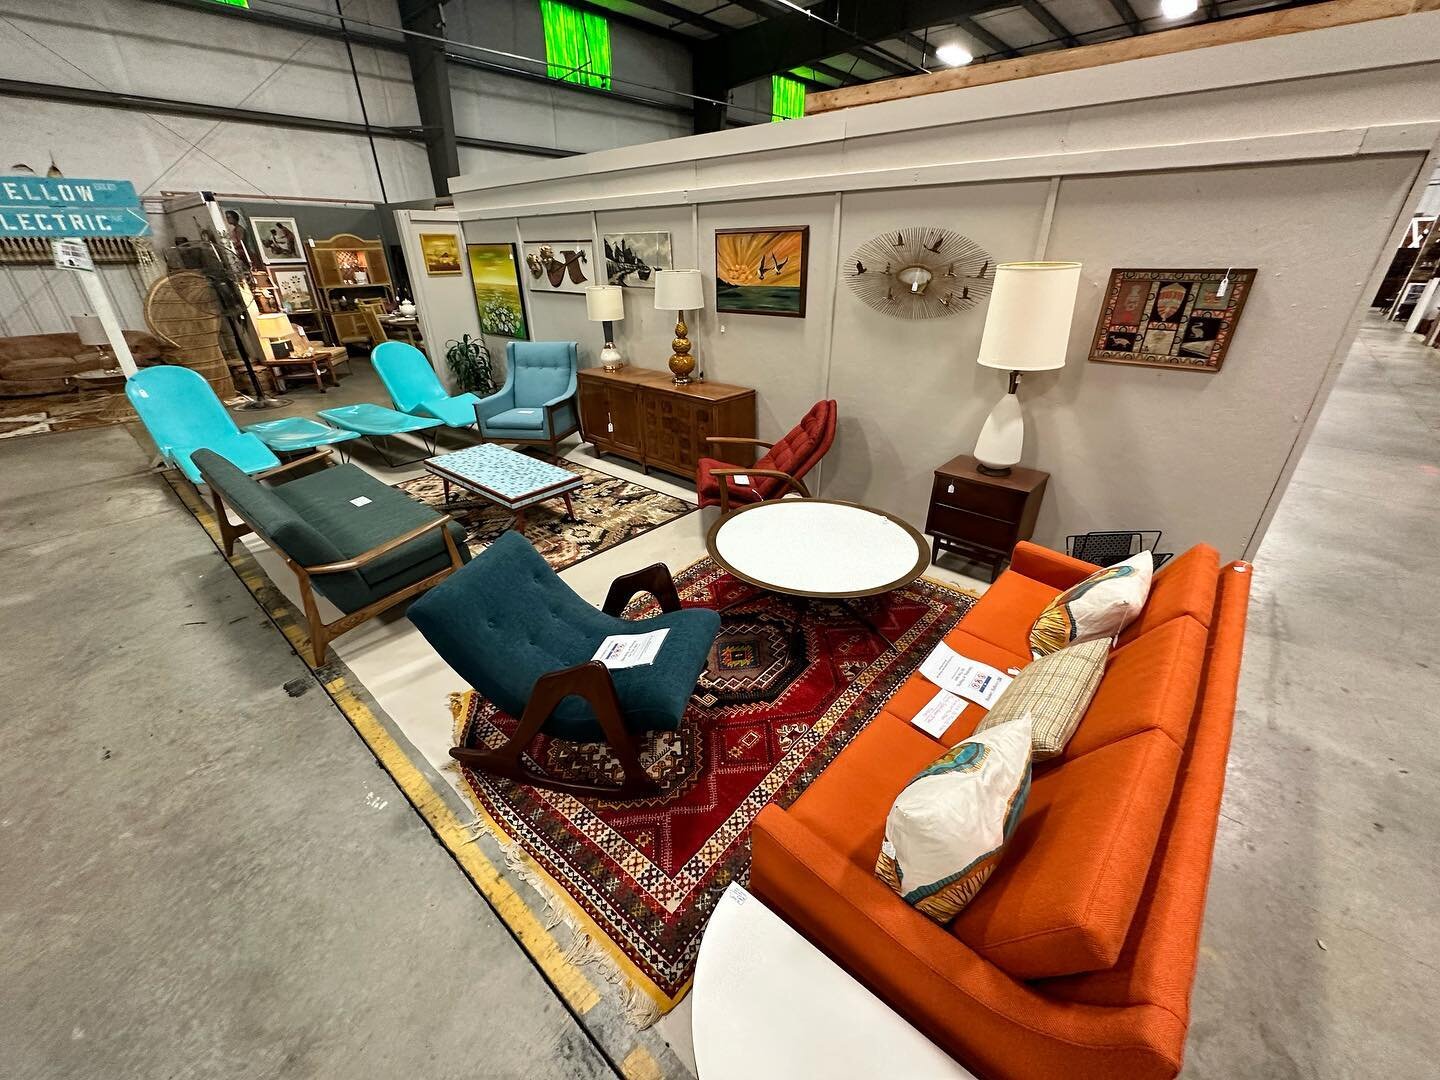 Haven&rsquo;t been by the station in a while? Well I&rsquo;d say your in for a treat! It feels like we&rsquo;ve had a bit of a makeover. Stop by to see all of the new vendors, local artists, and eclectic one of a kind #vintage and #midcentury home de